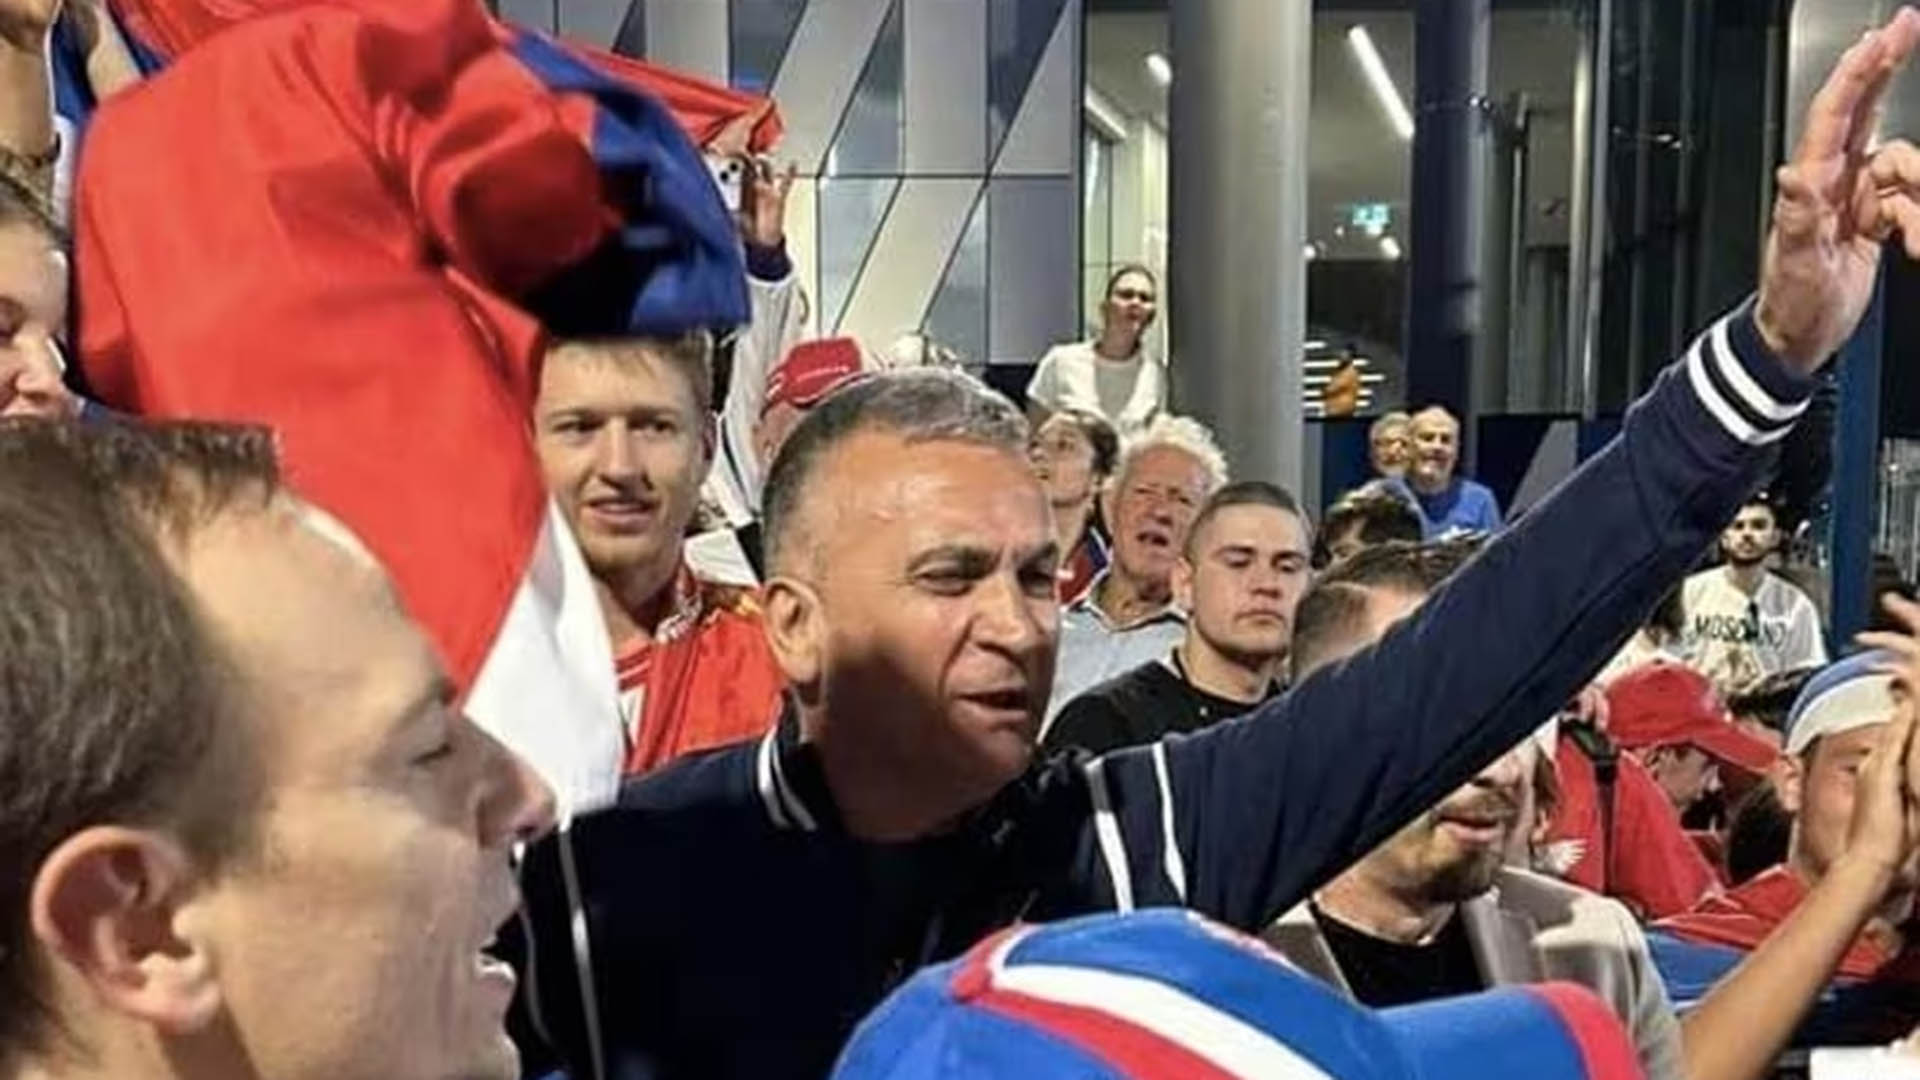 Srdjan Djokovic, Novak's father, showed up with pro-Russian fans after his son's match